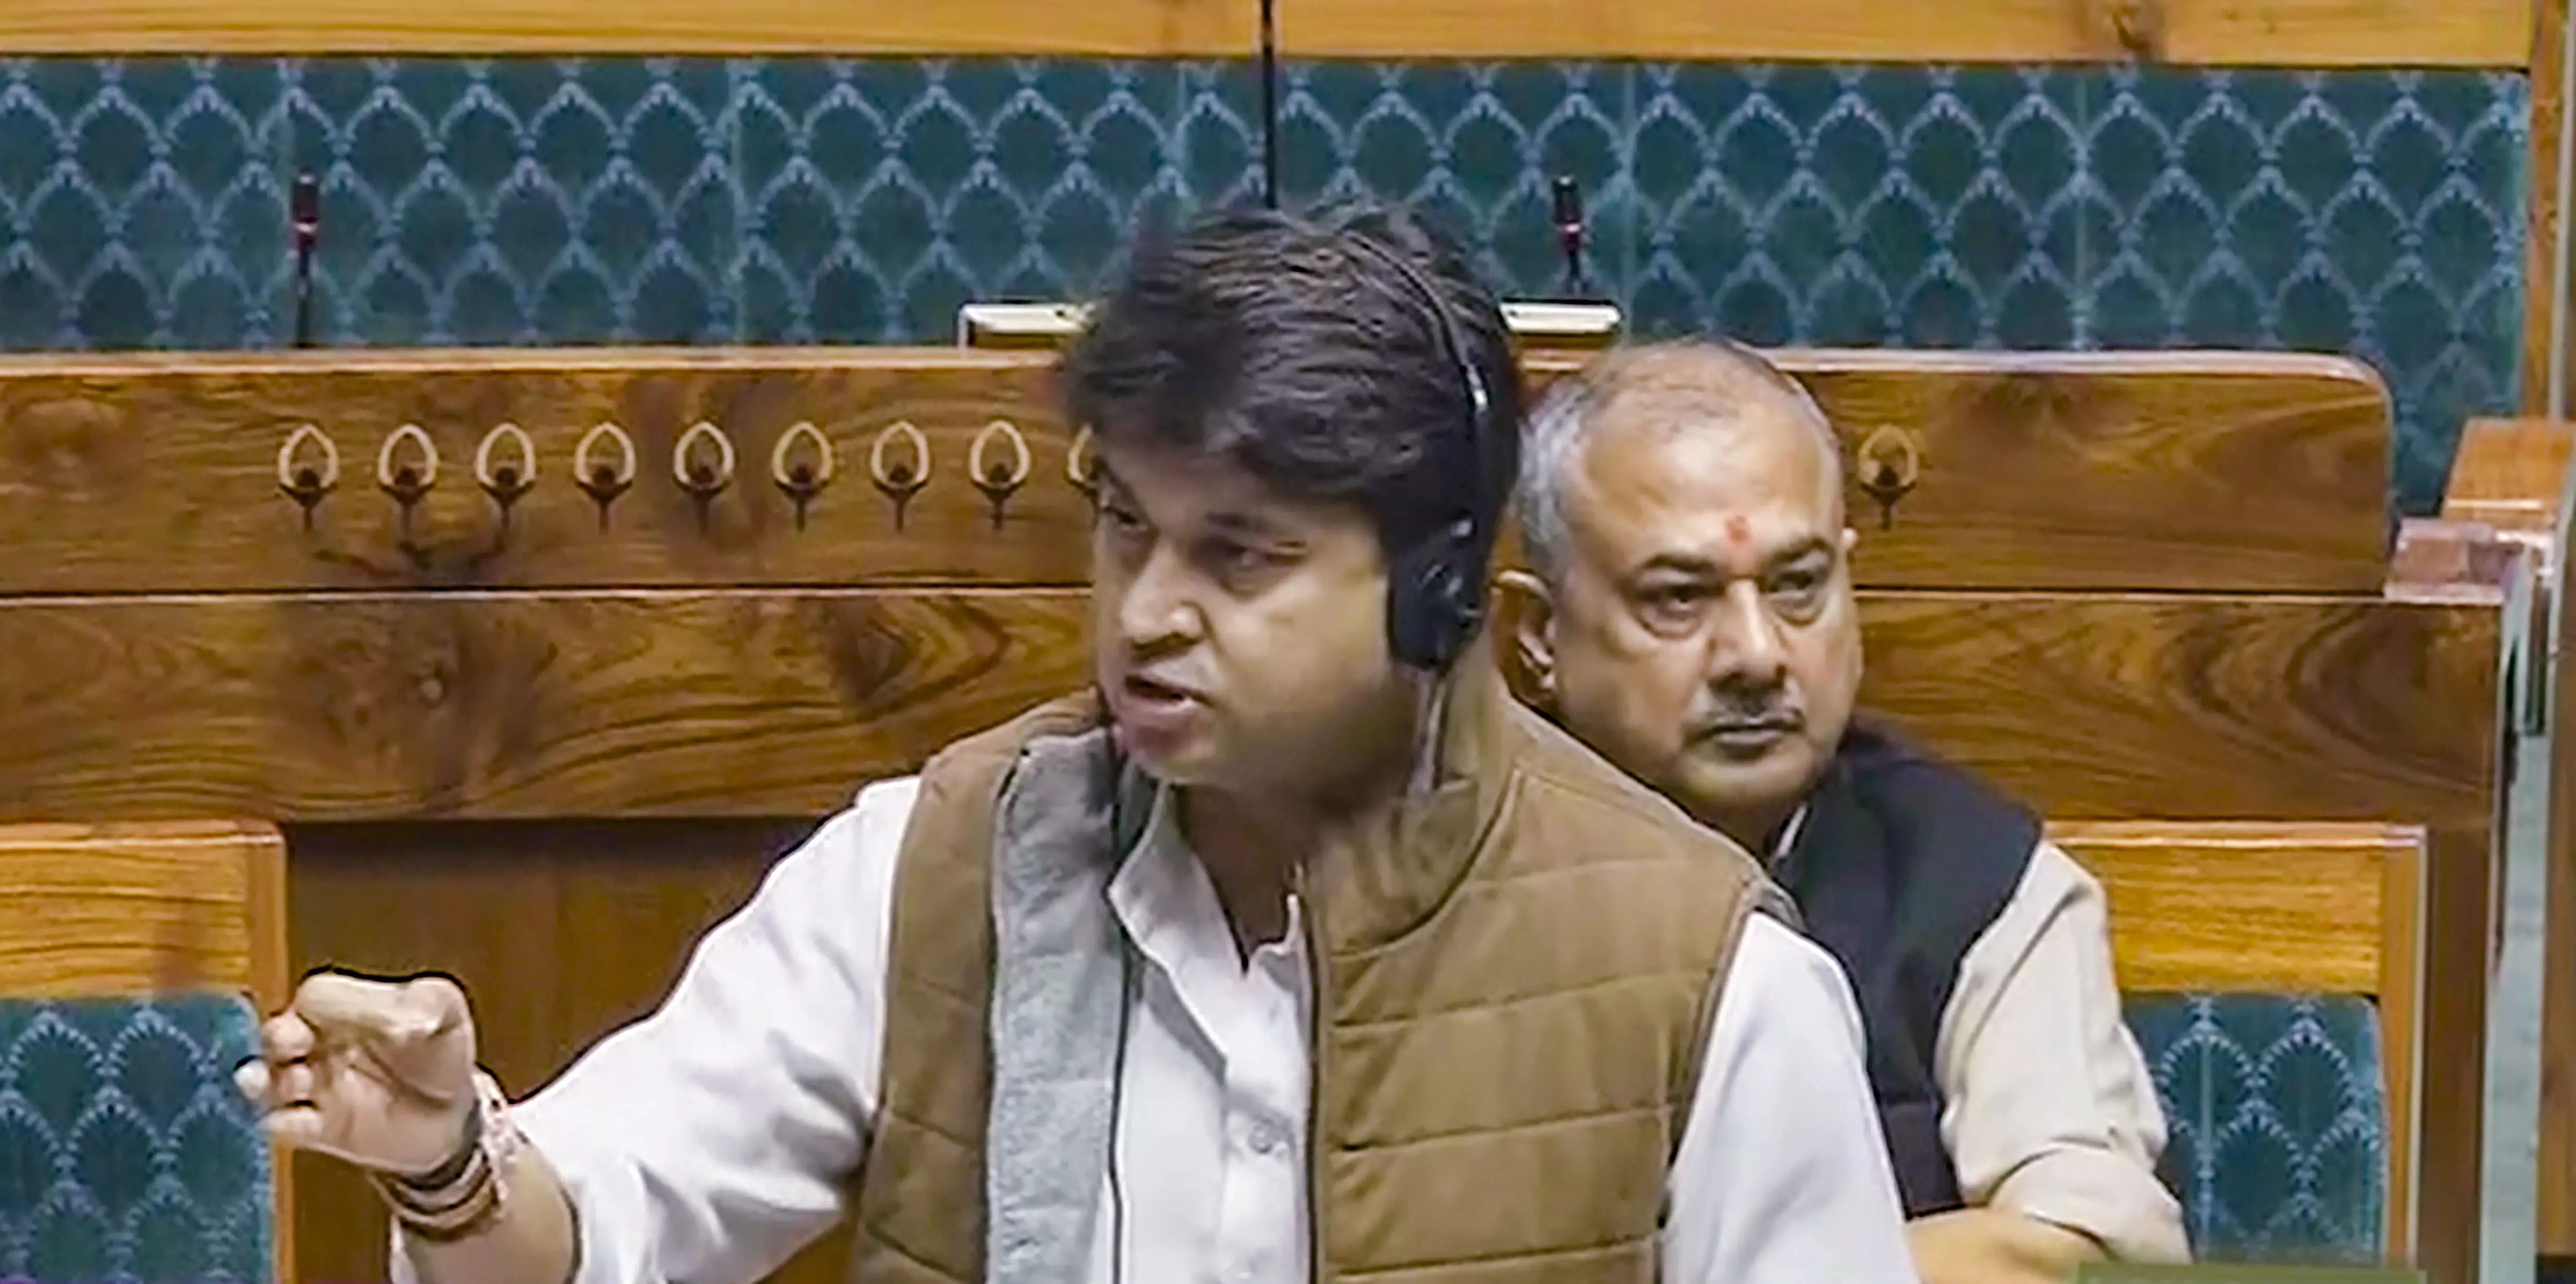 Congress doubts EVMs only when it loses elections: Jyotiraditya Scindia